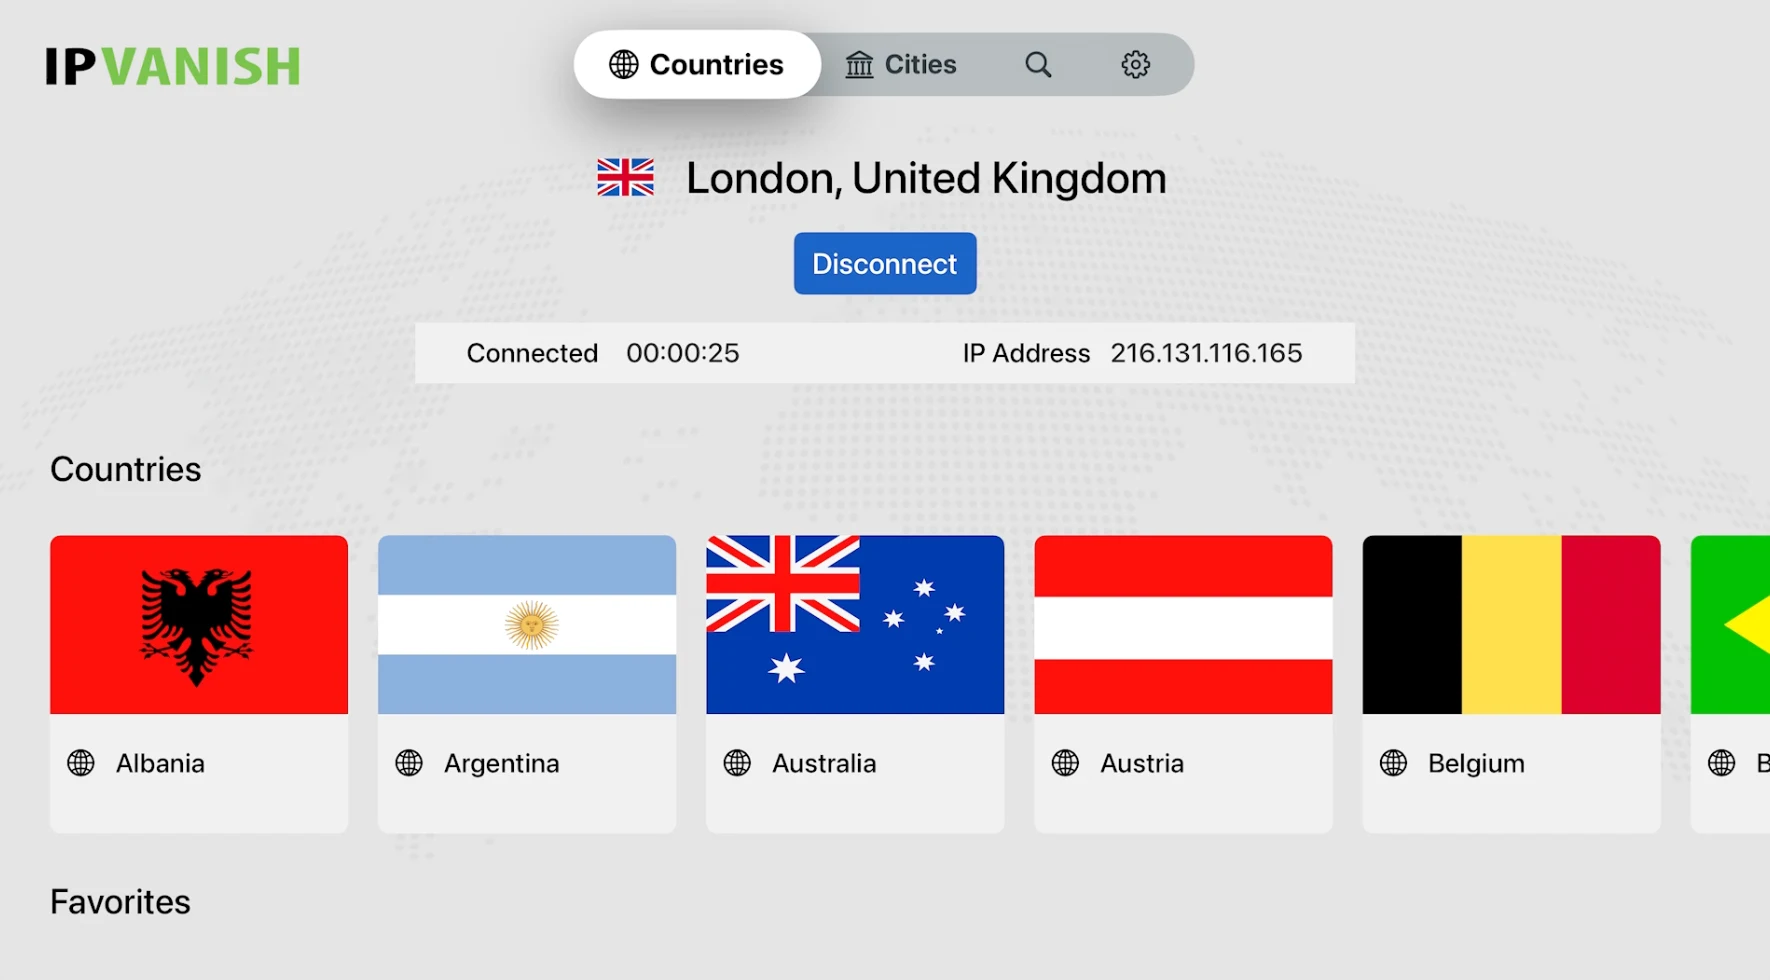 User interface of the IPVanish tvOS app showing connection status to London, United Kingdom, with an IP address displayed. A menu lists countries with flag icons, including Albania, Argentina, Australia, Austria, and Belgium.